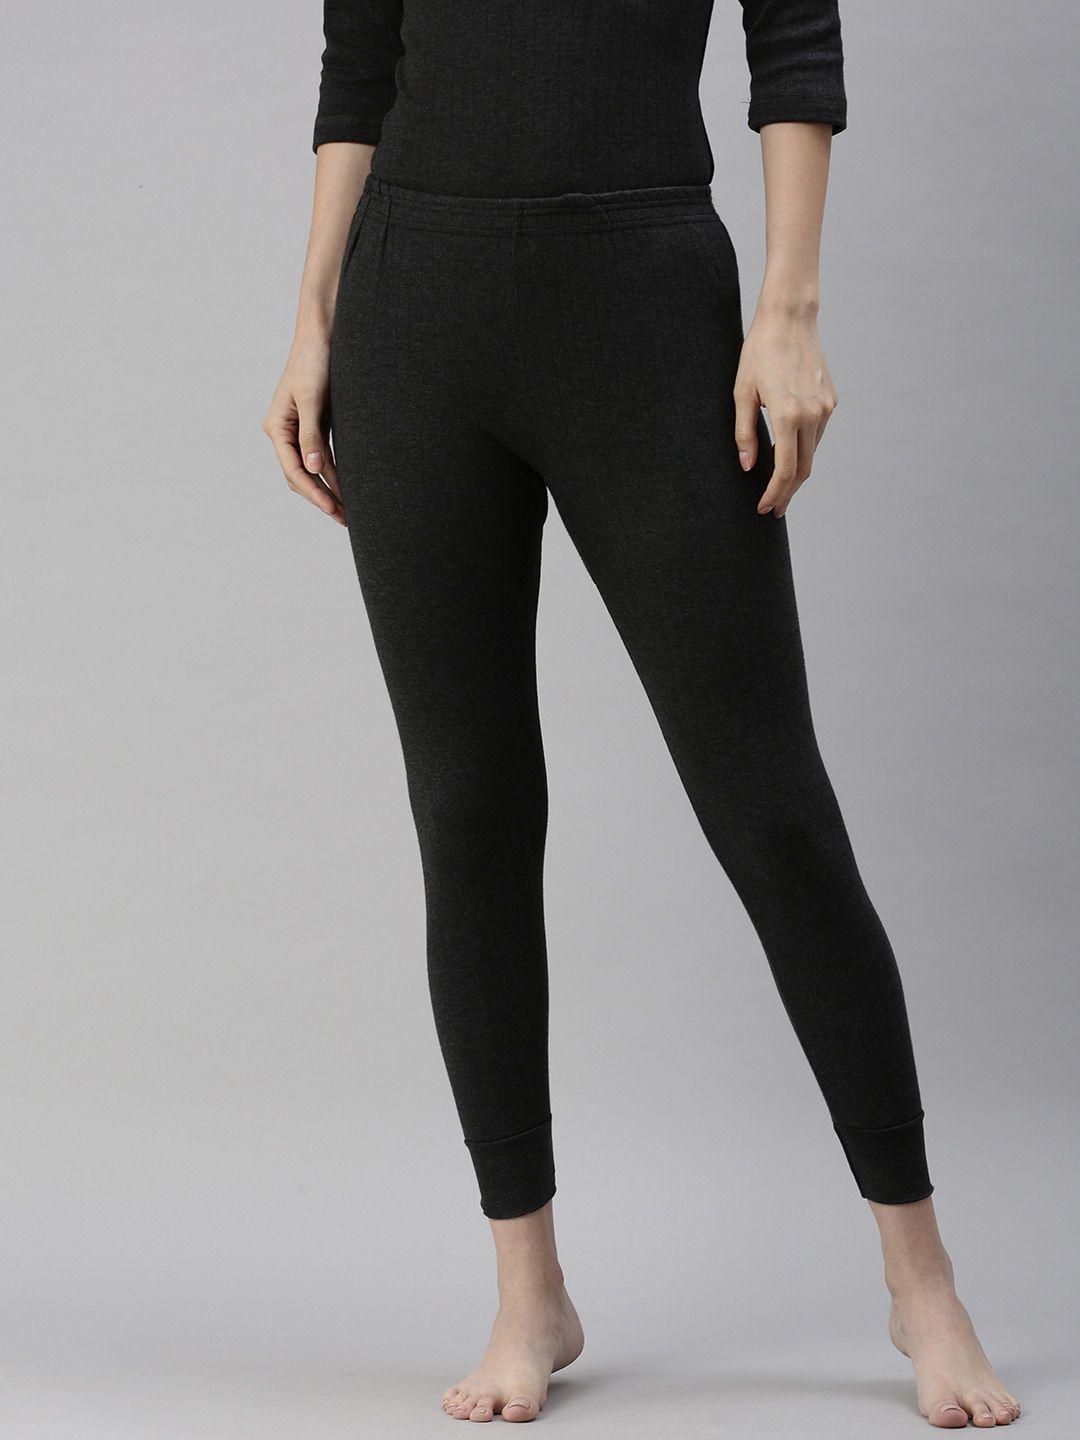 lux cottswool women black solid cotton thermal bottoms